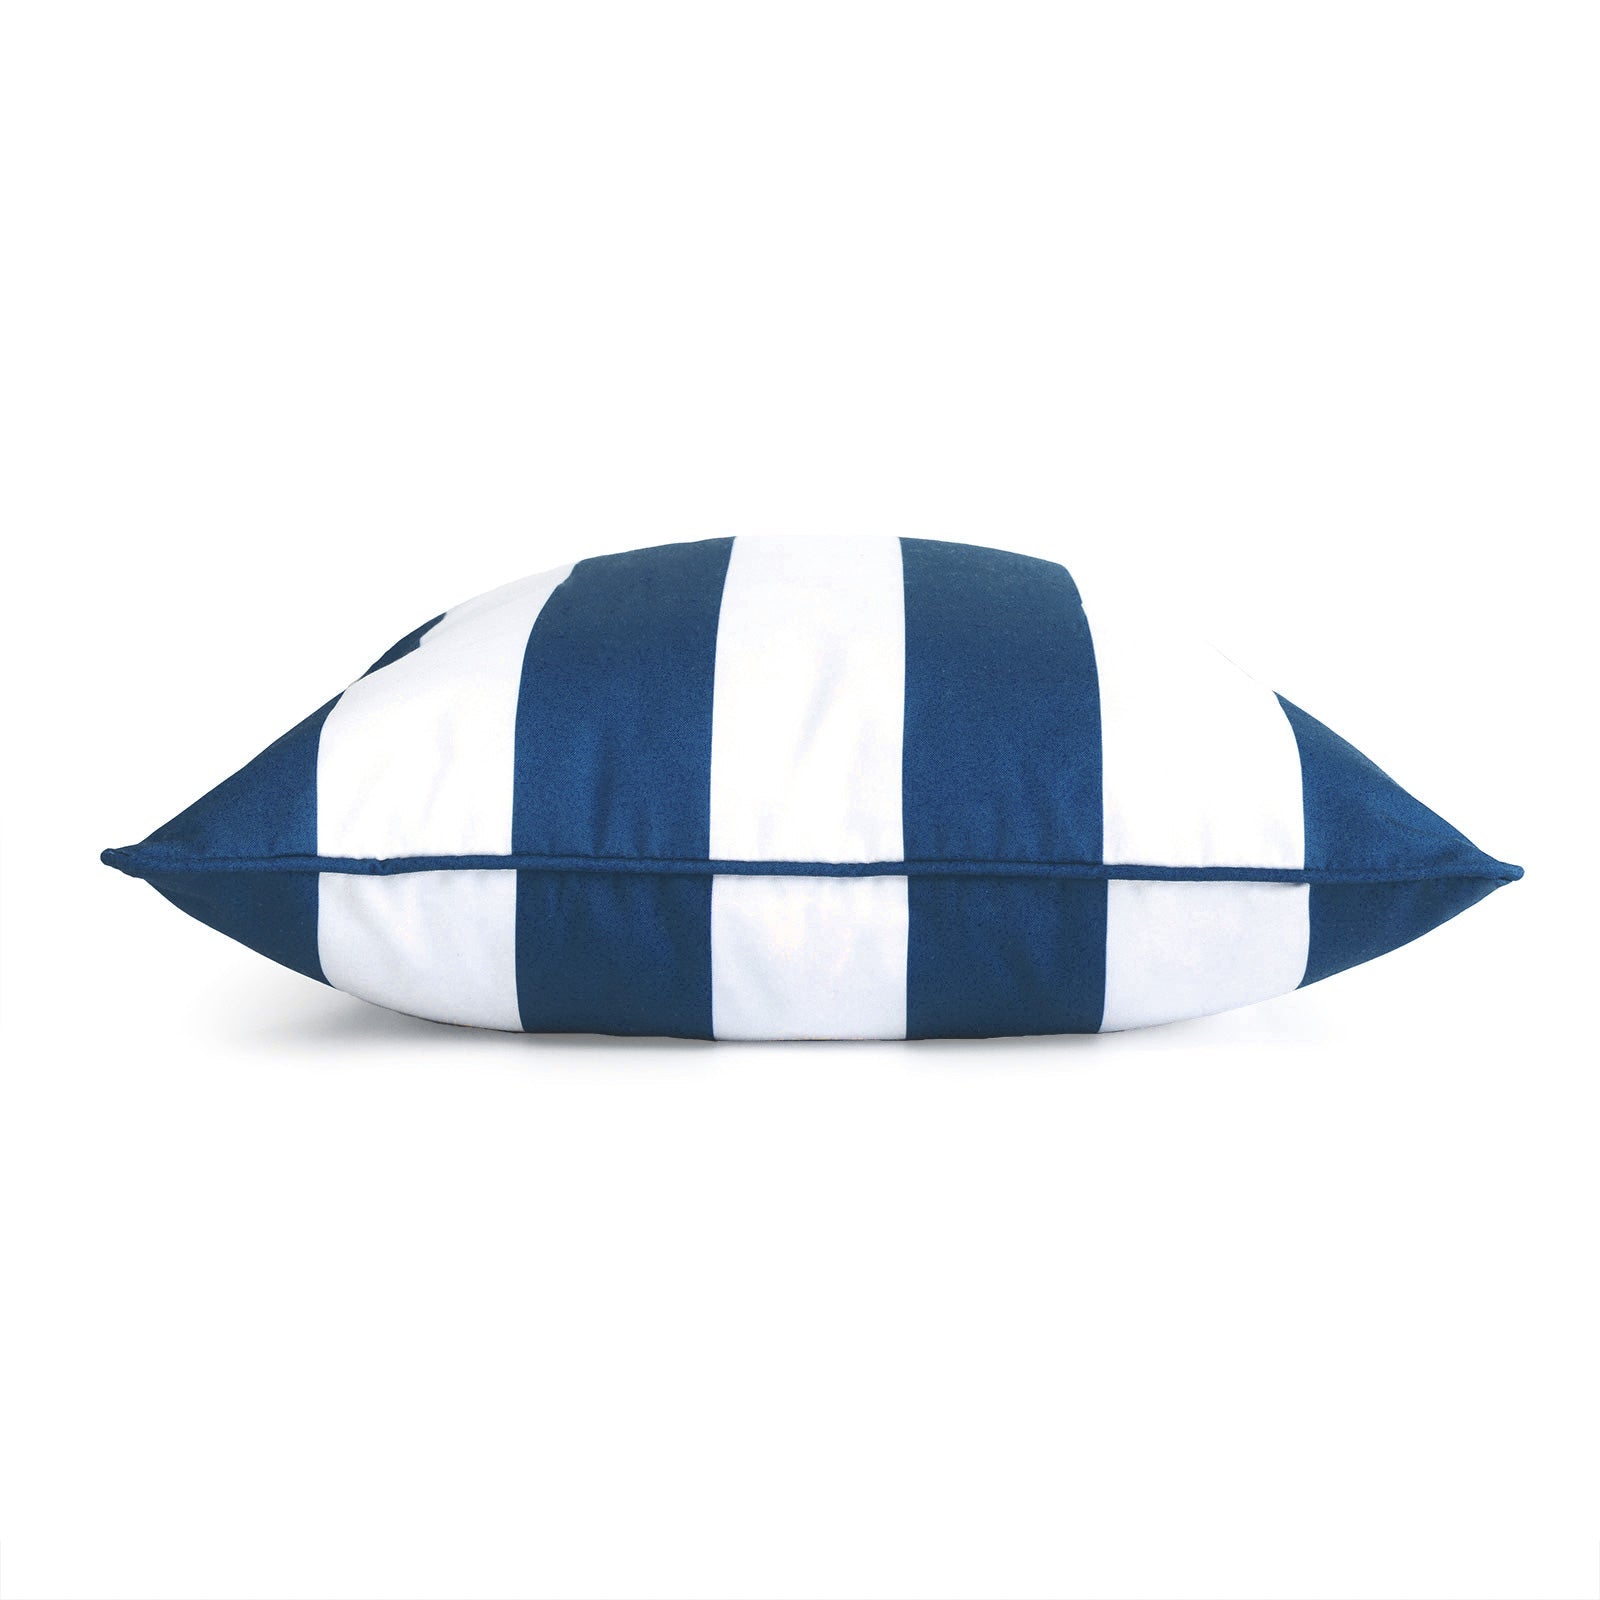 Navy Blue Outdoor Pillow Cover, Stripes, 18"x18"